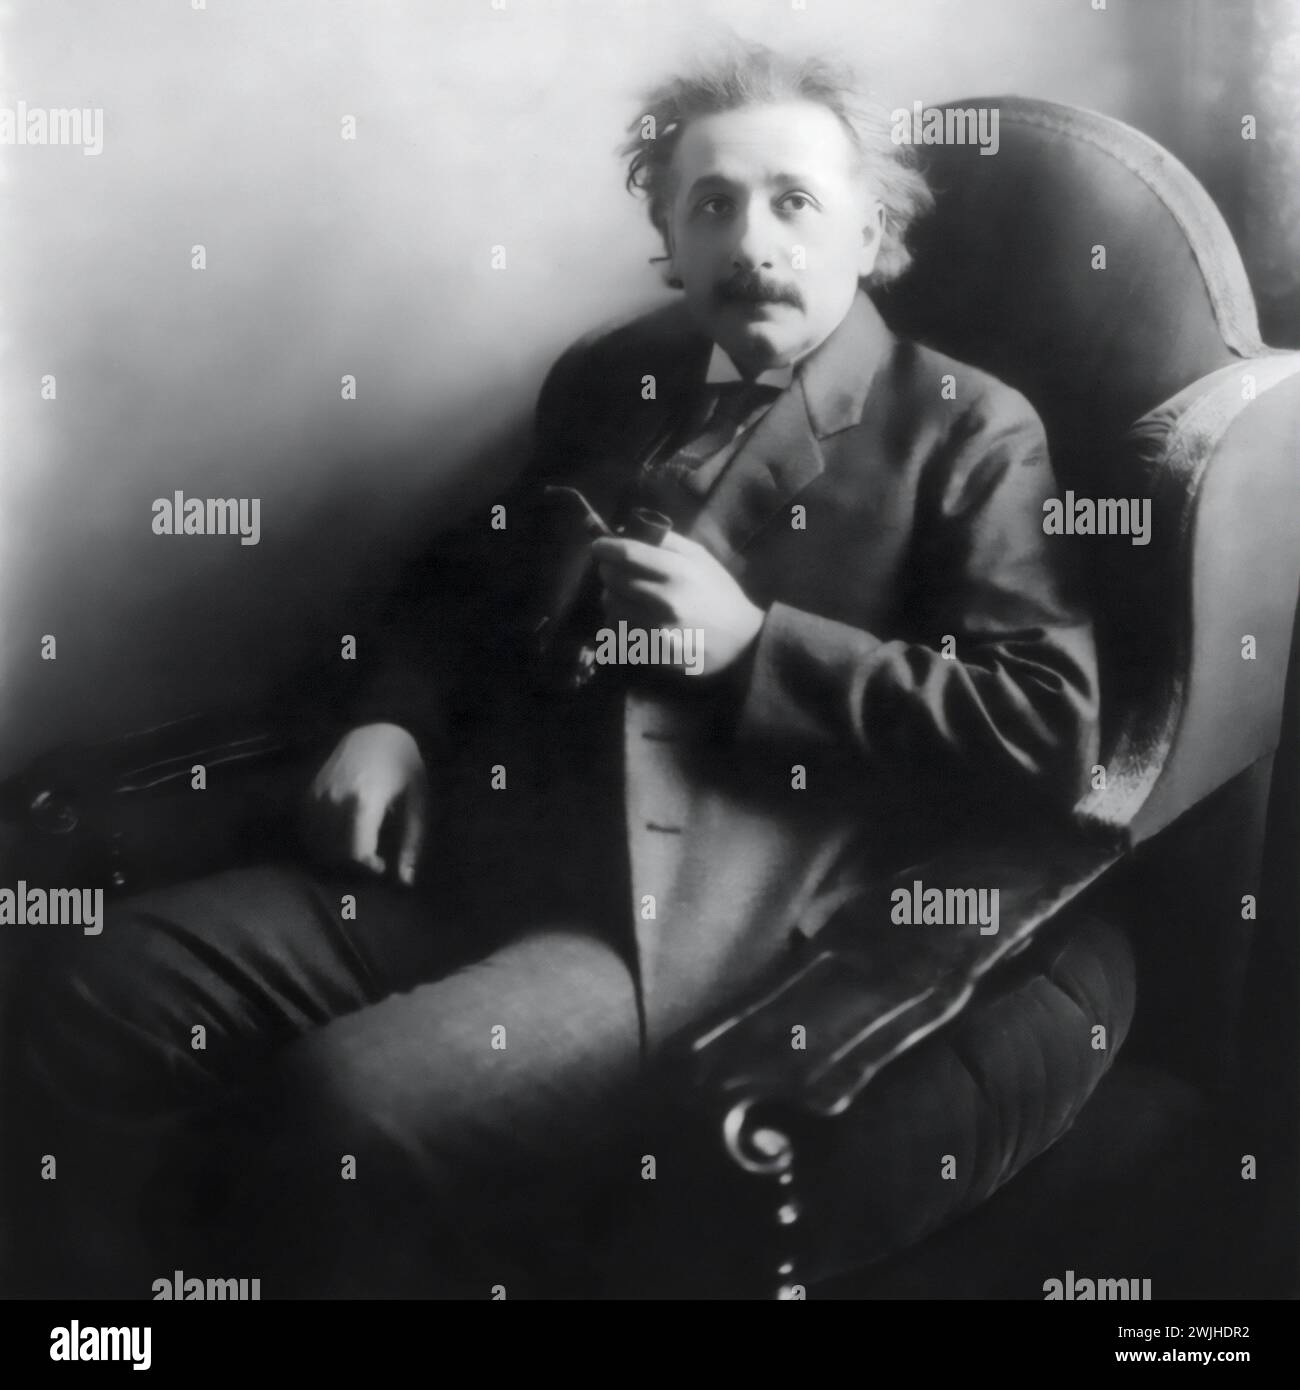 Albert Einstein (1879-1955), winner of the 1921 Nobel Prize in Physics, seated with his pipe in 1921. Stock Photo